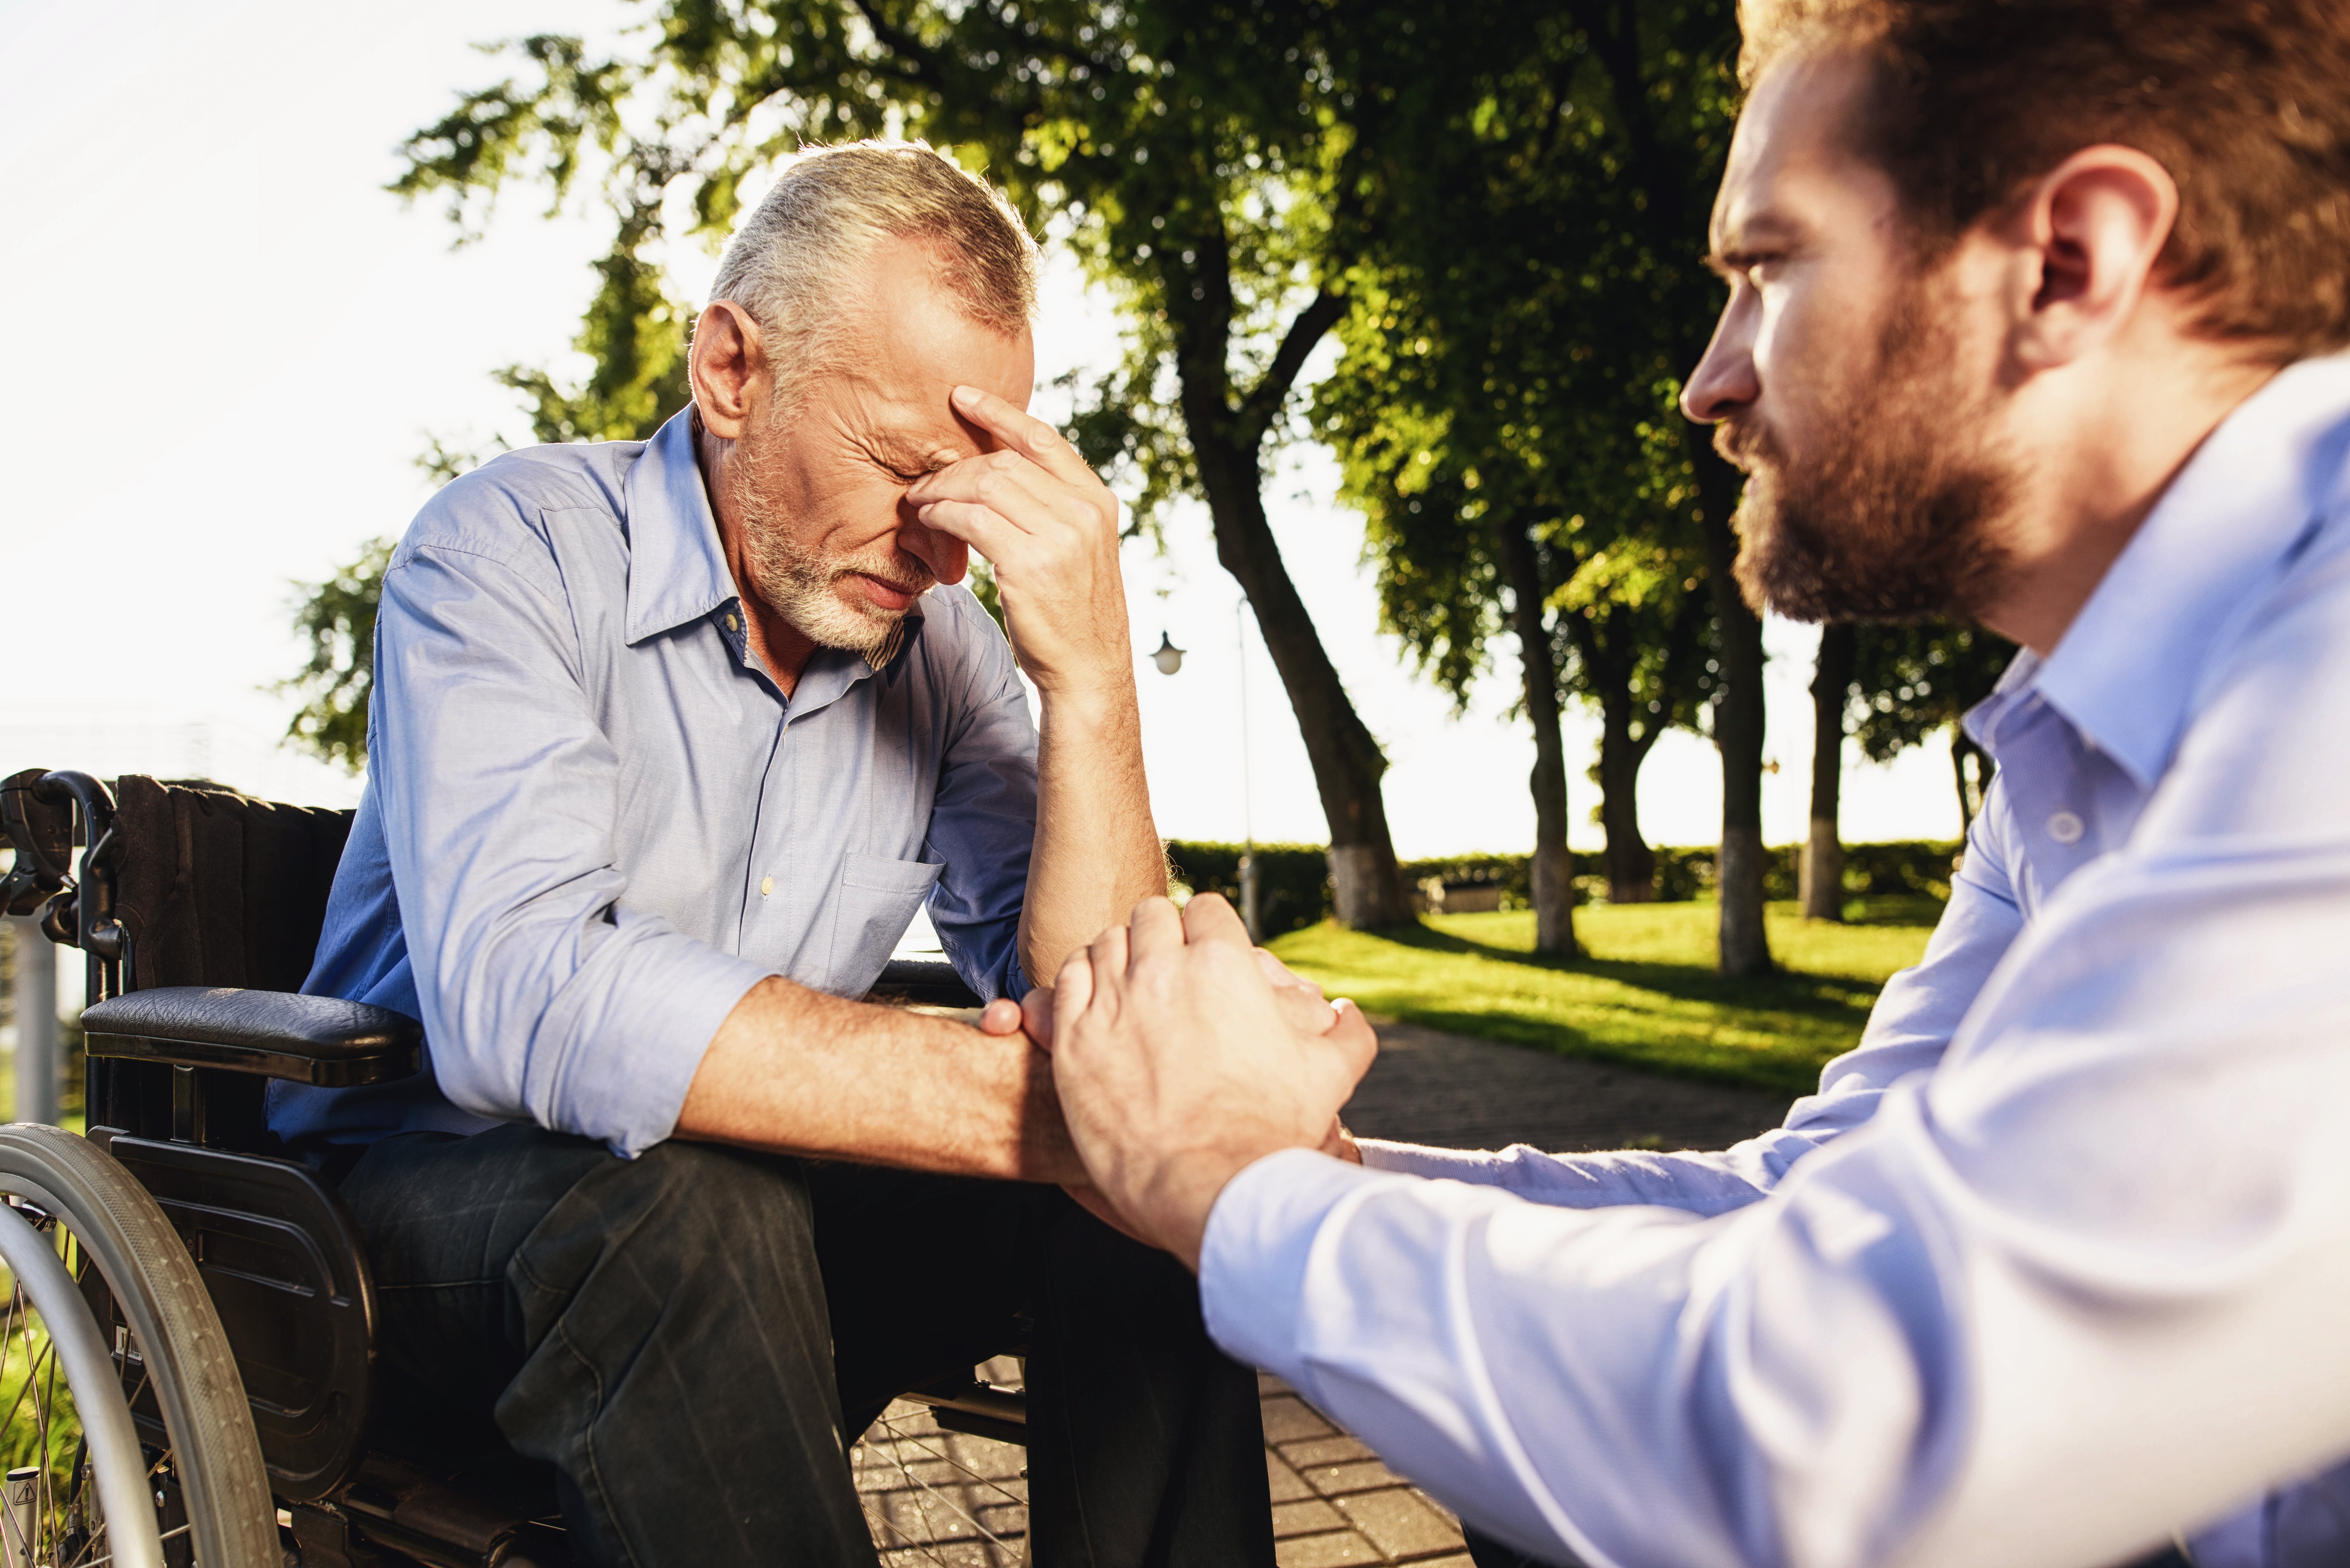 A young man is crouched next to an old man, who is thinking hard | Photo: Shutterstock.com